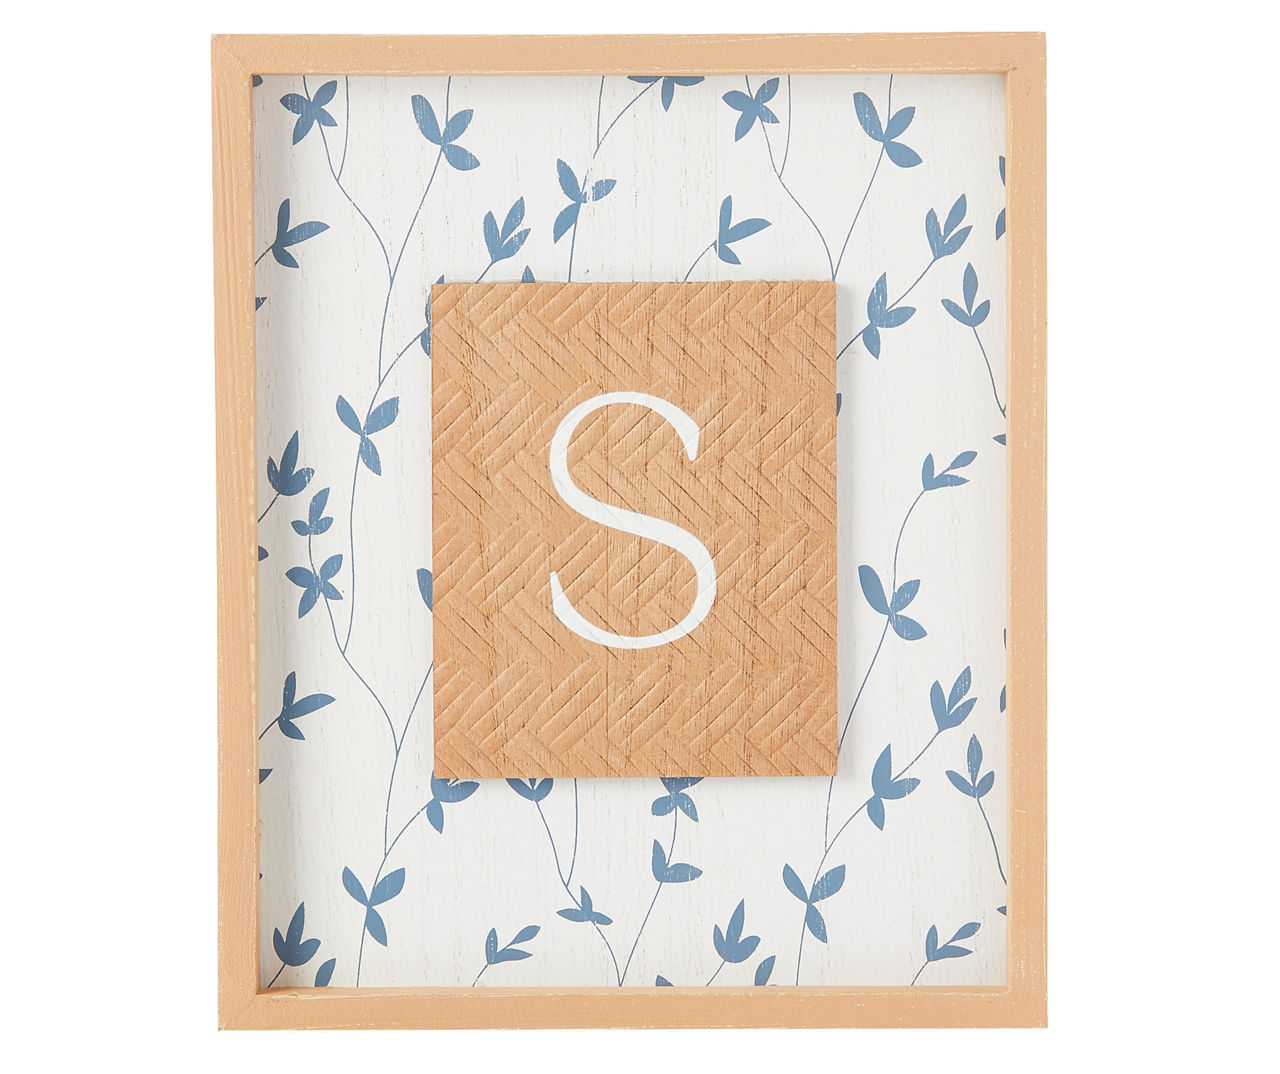 "S" White, Brown & Blue Floral Tabletop Plaque With Easel